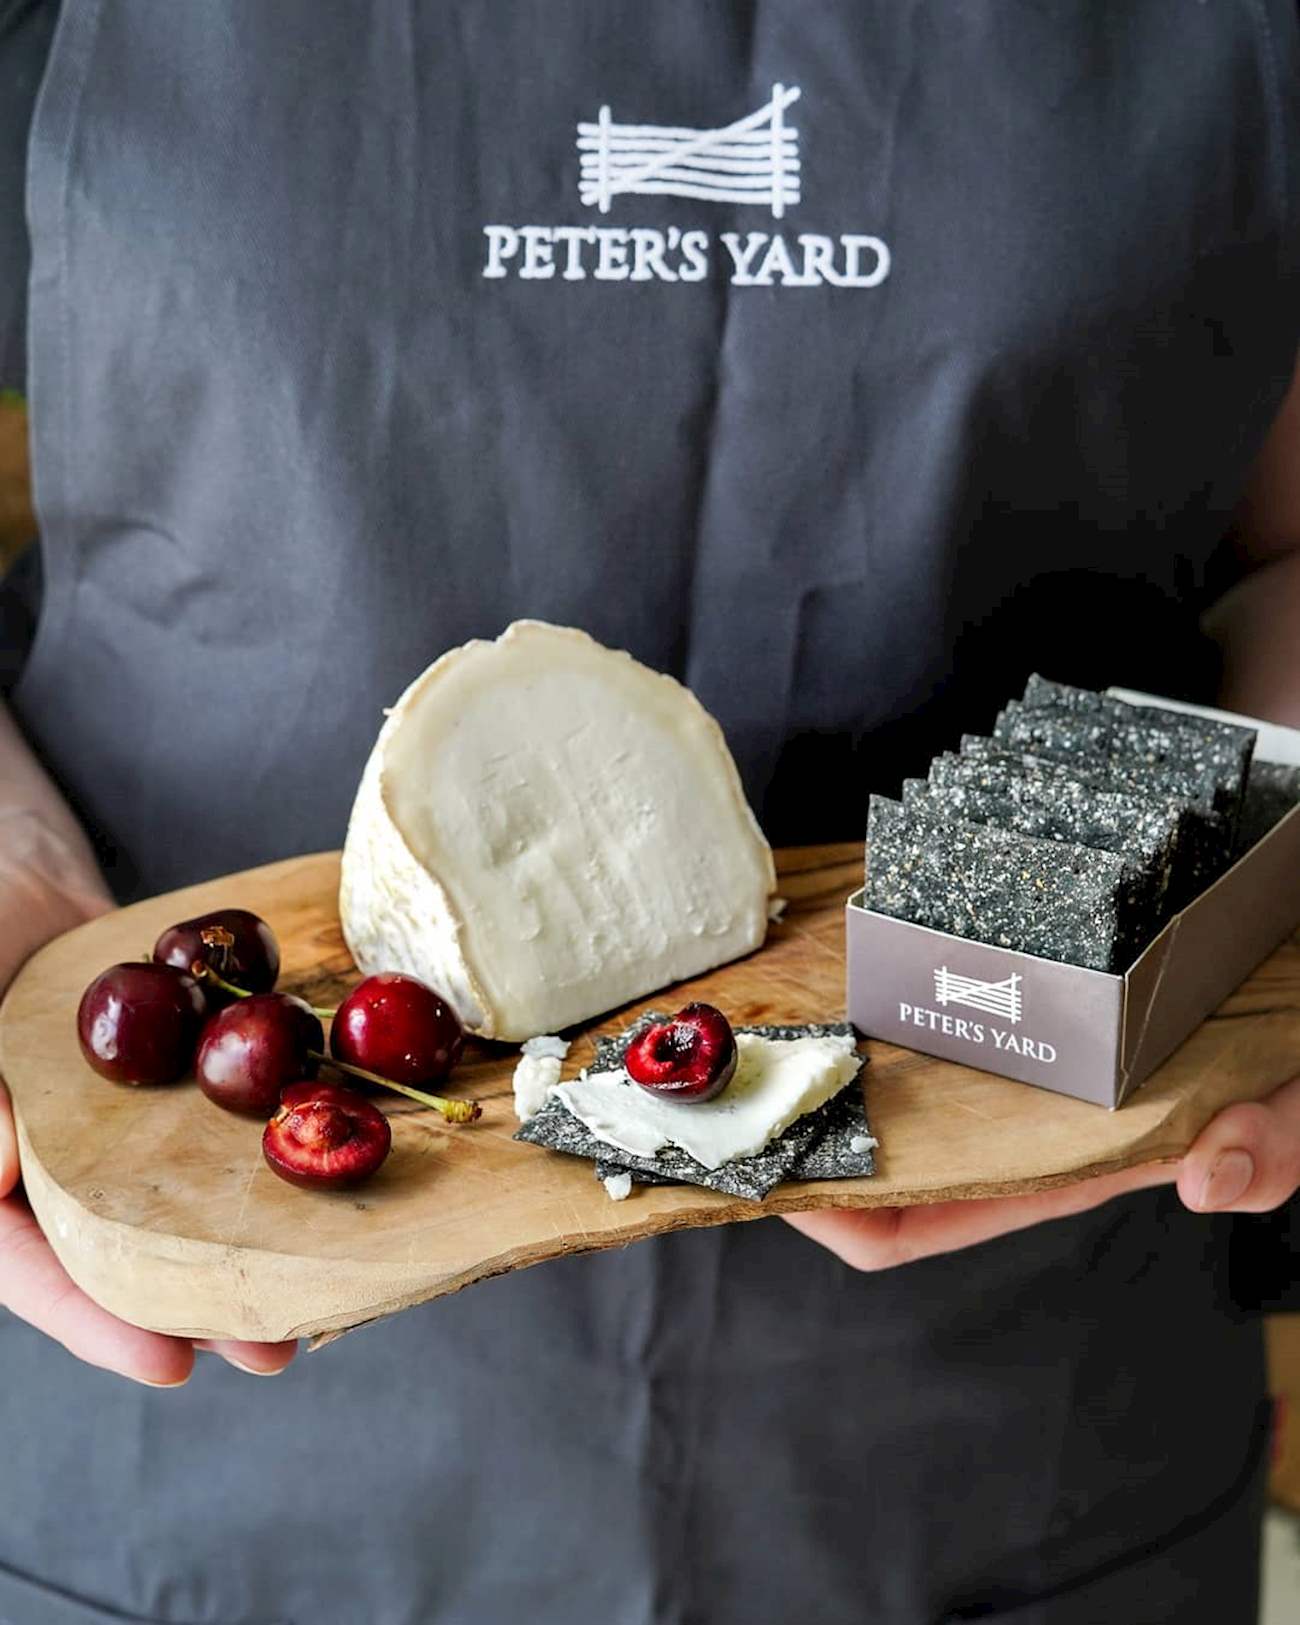 10 Most Popular English Goat's Milk Cheeses